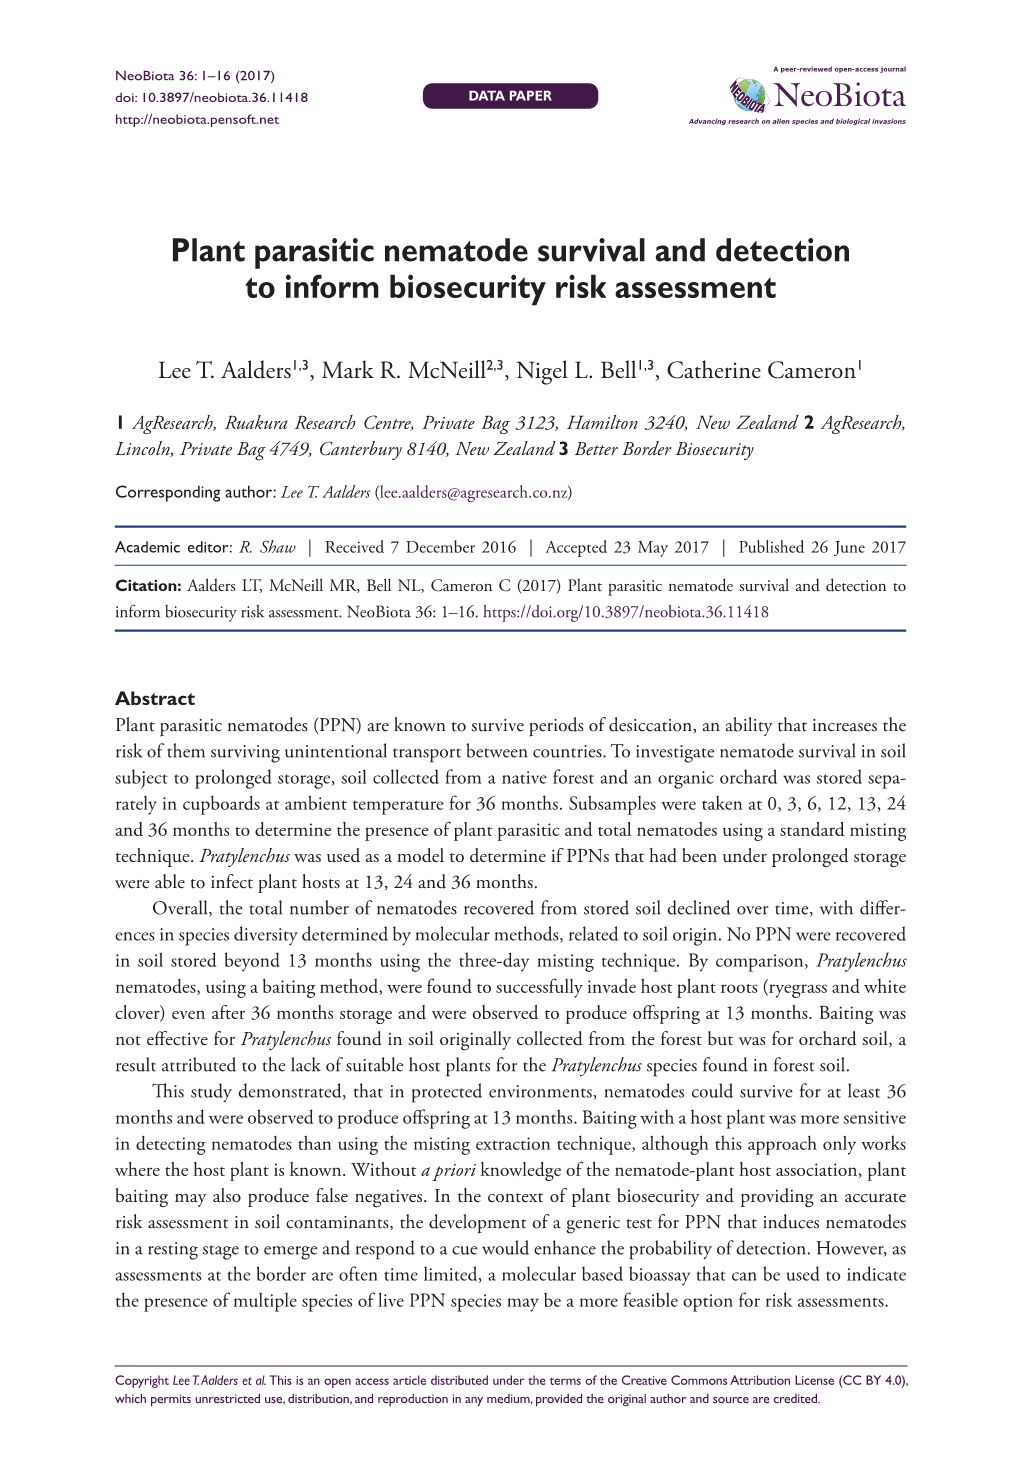 ﻿Plant Parasitic Nematode Survival and Detection to Inform Biosecurity Risk Assessment